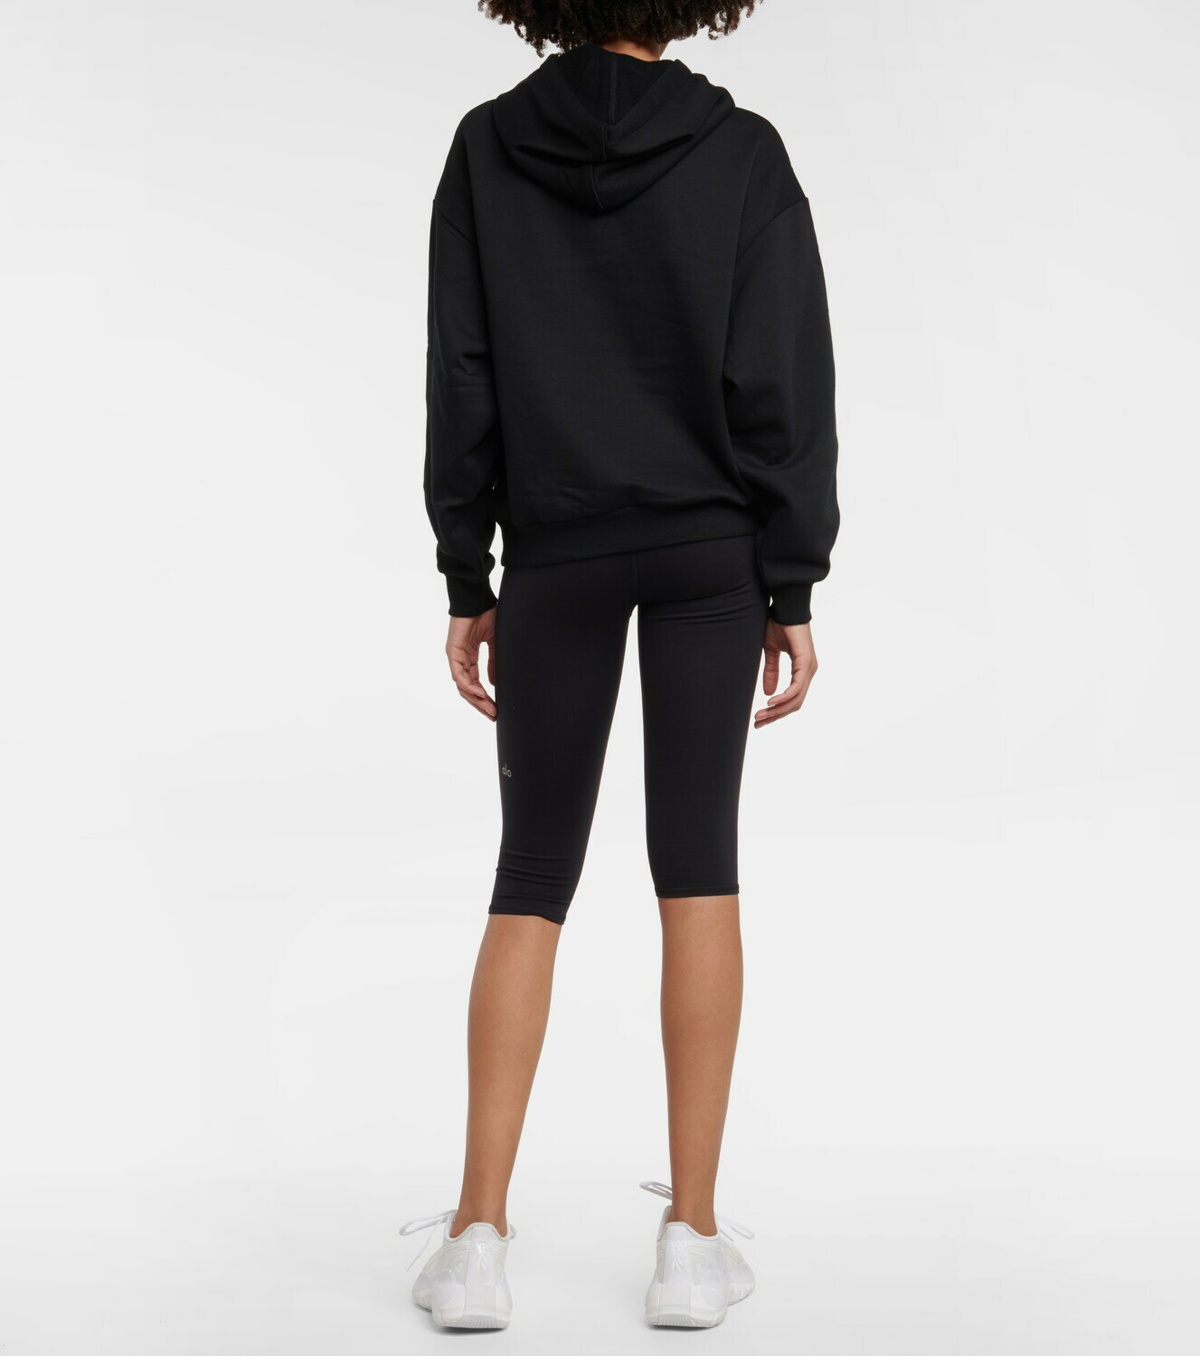 ALO YOGA Airlift hooded stretch-jersey sweatshirt